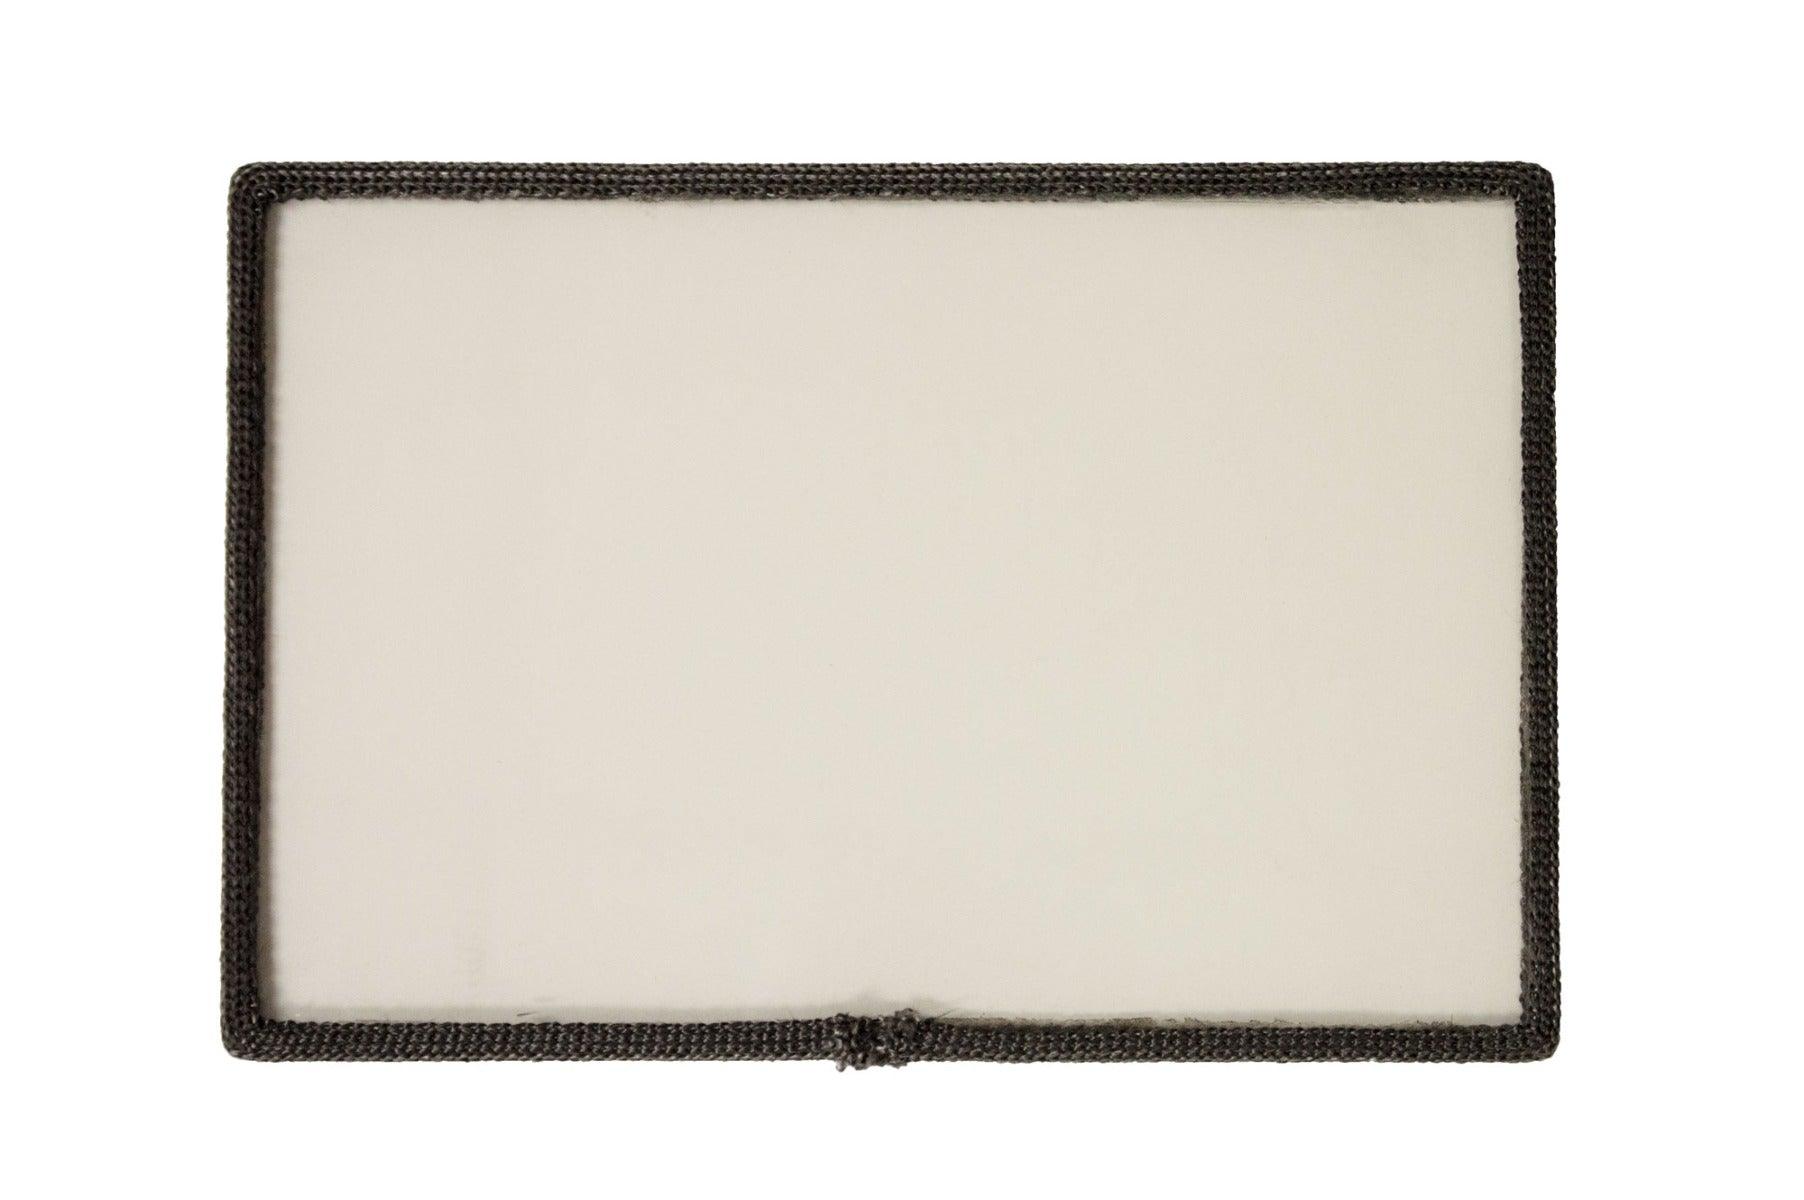 Waterford Erin 9 Bar Glass - Woodstove Fireplace Glass